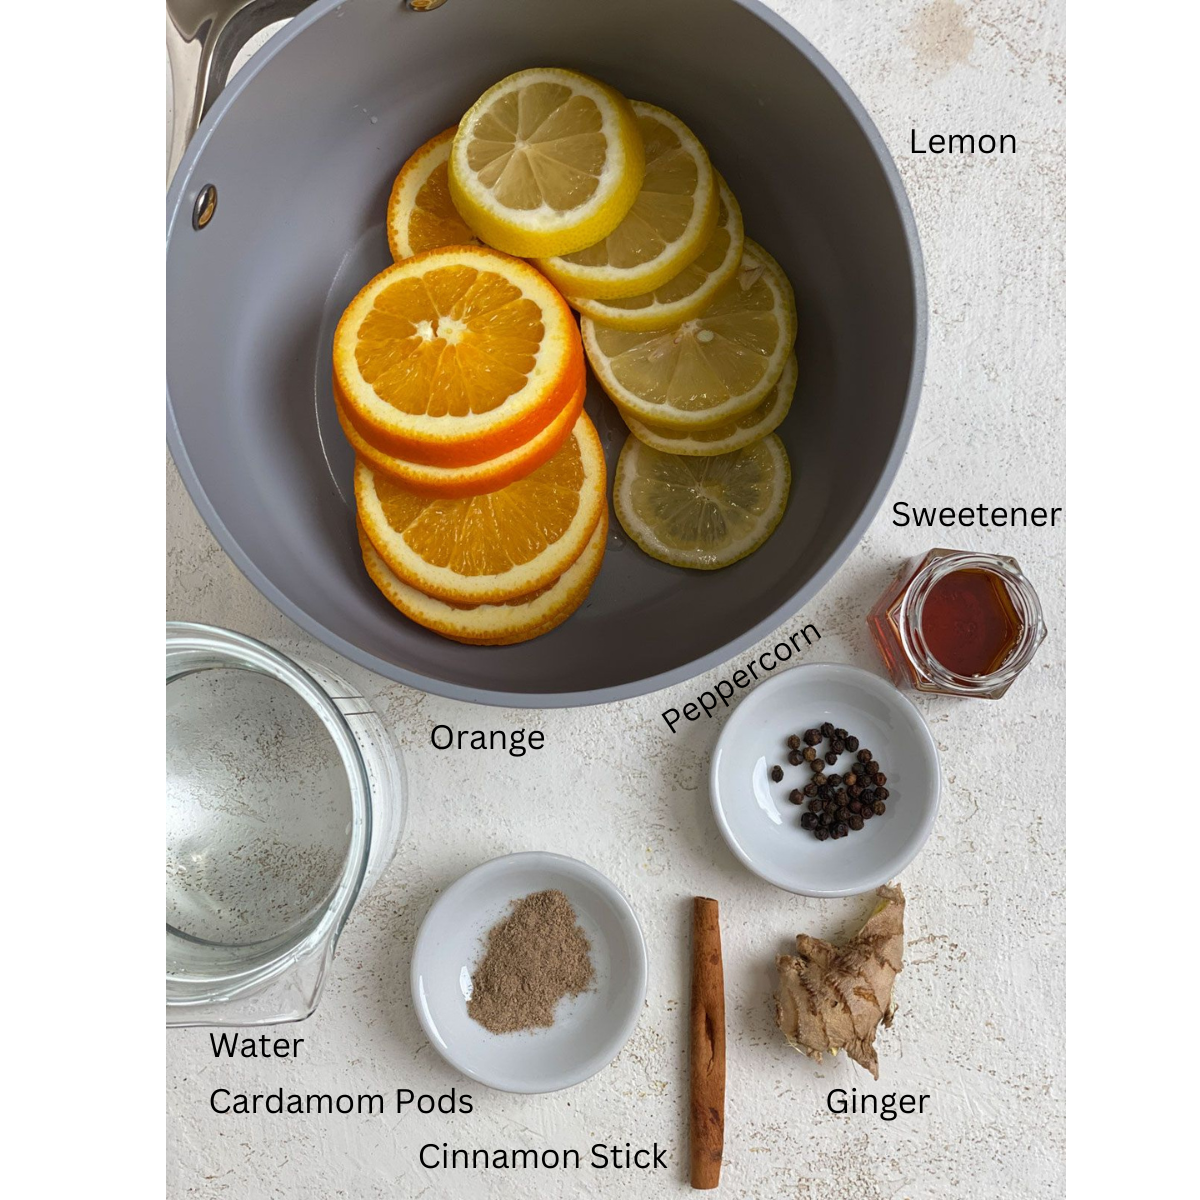 ingredients for Winter Tonic measured out against a white surface